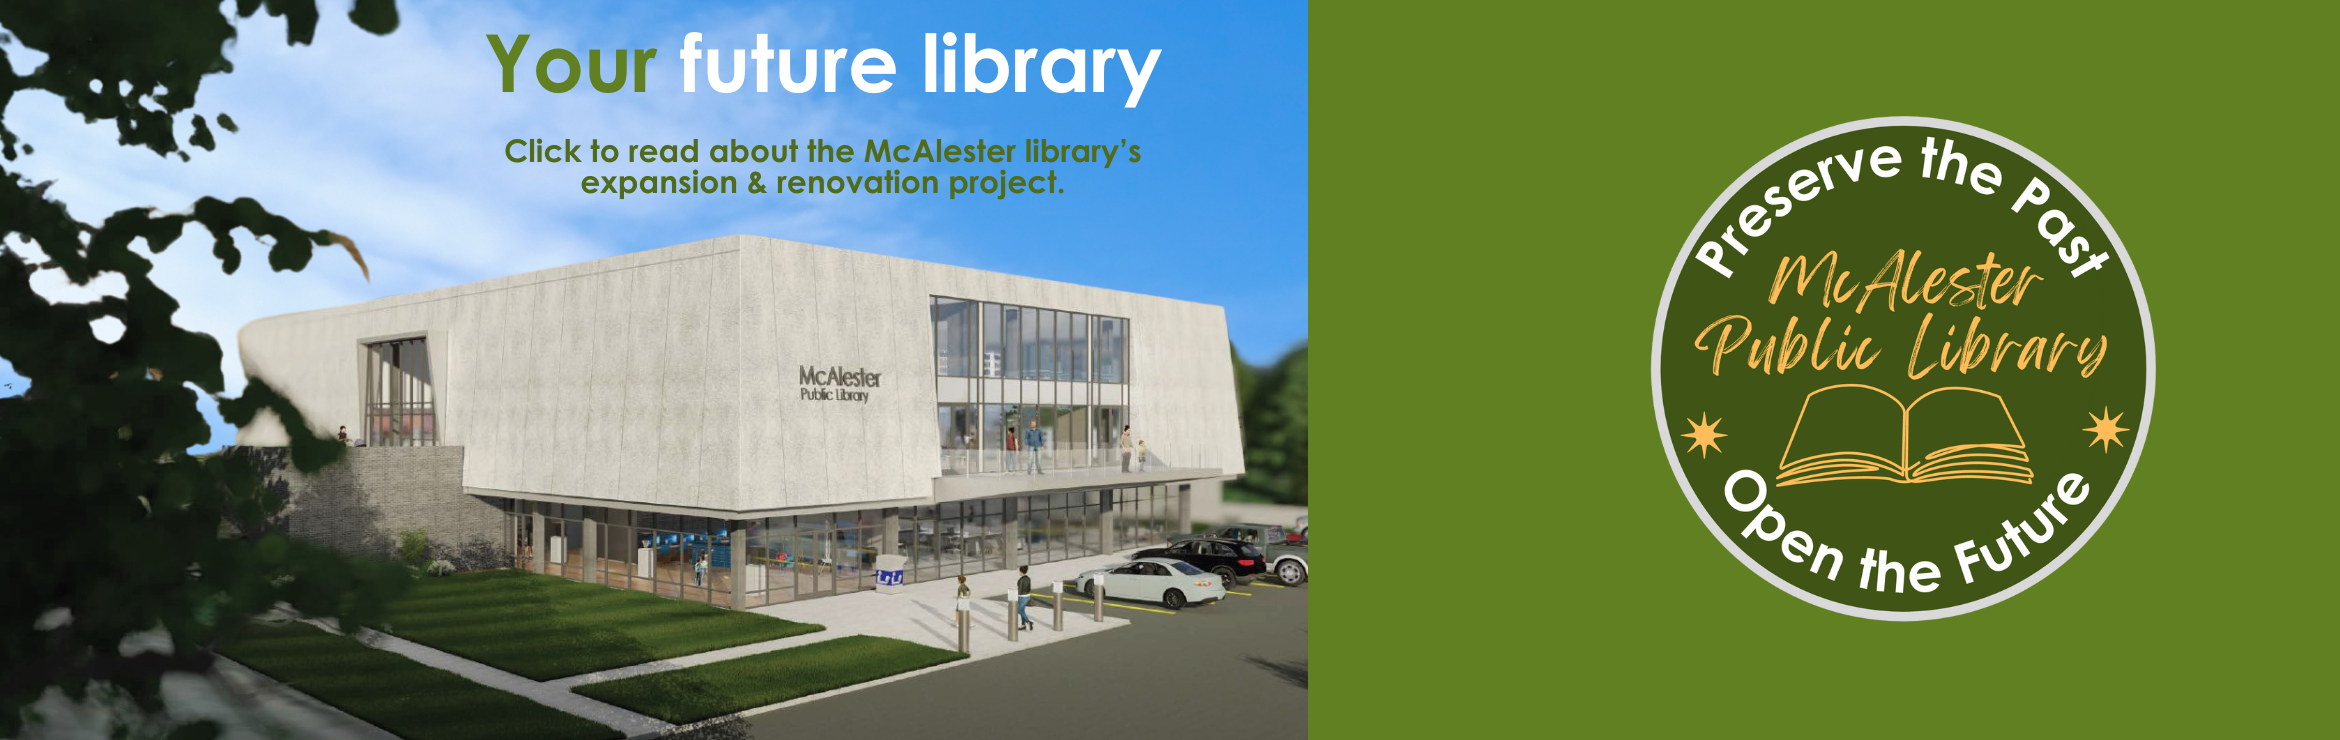 McAlester Public Library Renovation Campaign